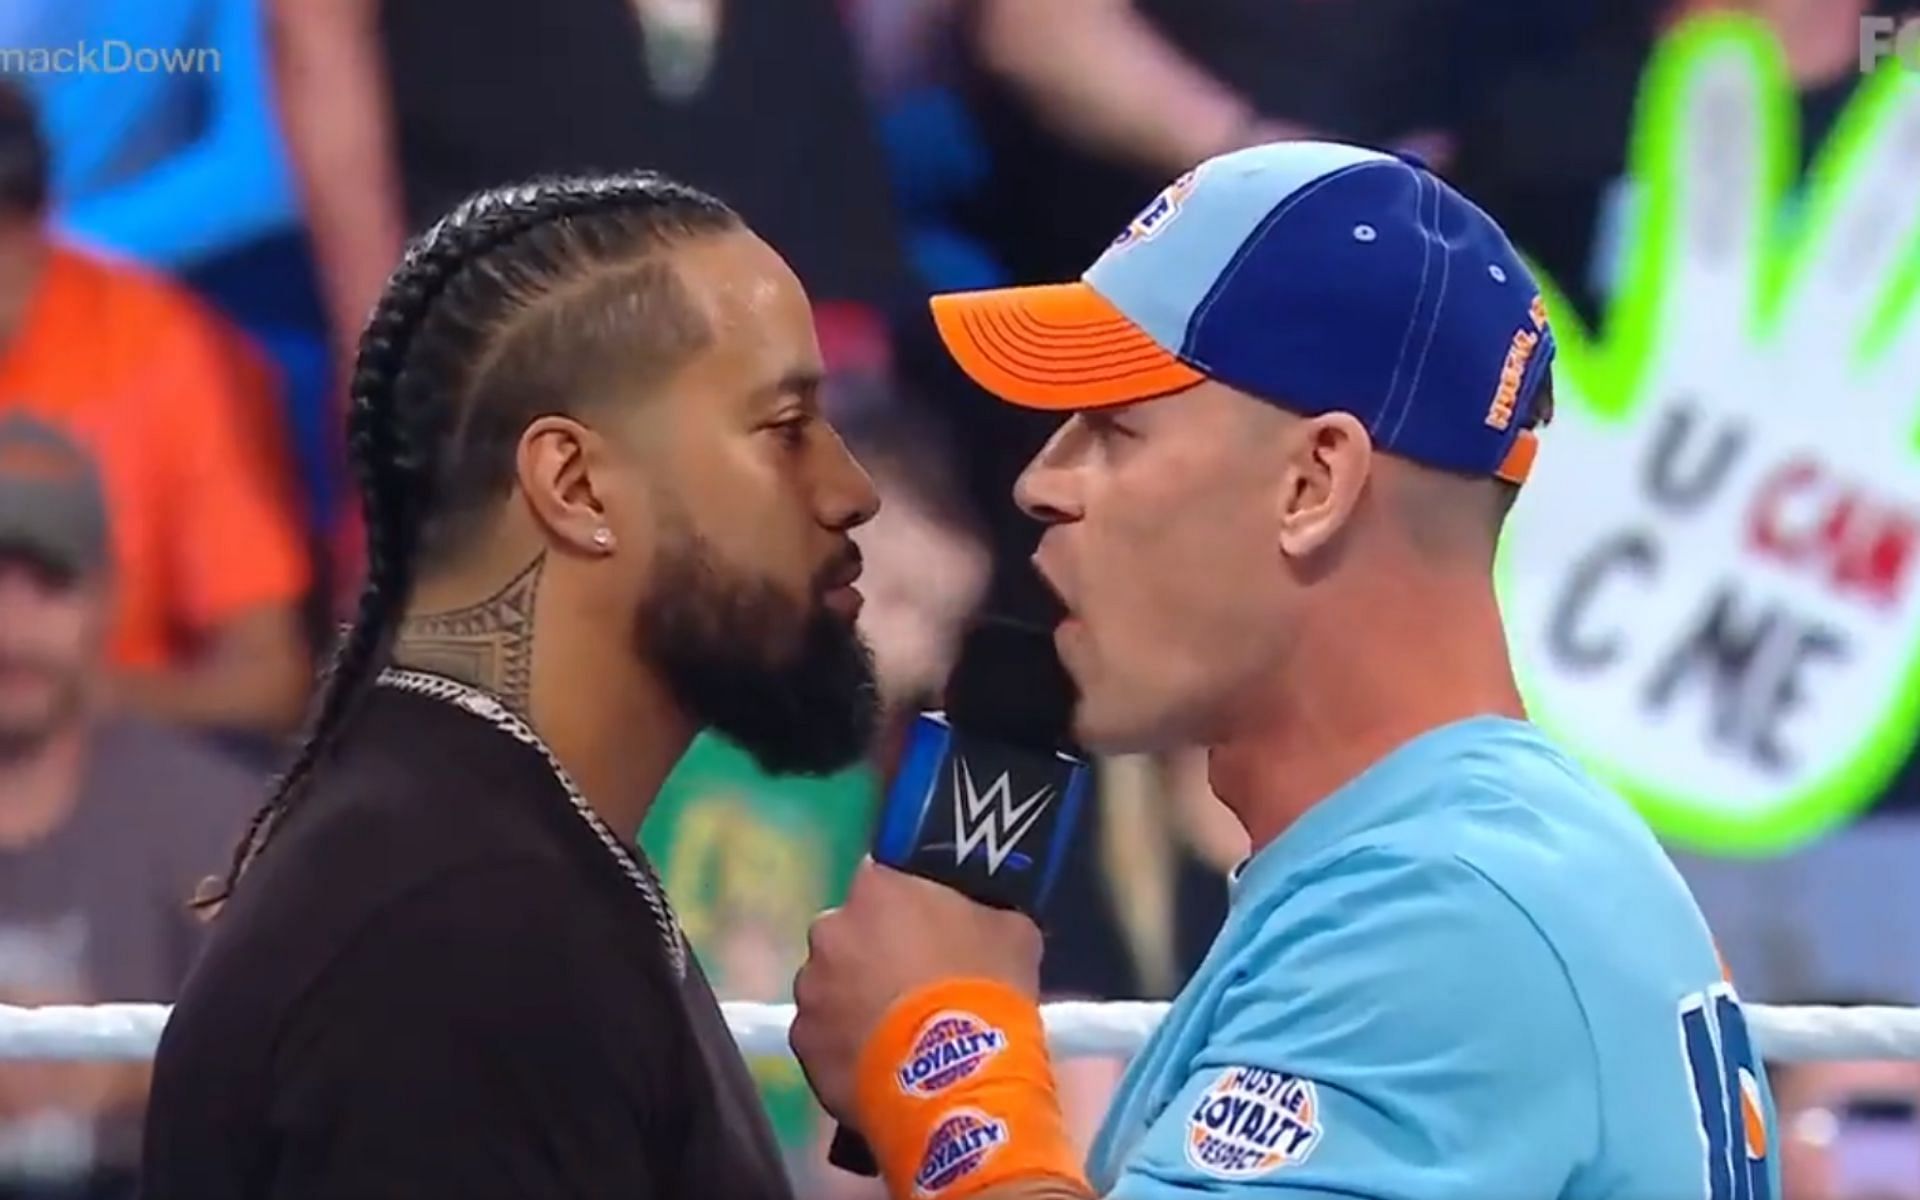 An interesting confrontation between Cena and Jimmy